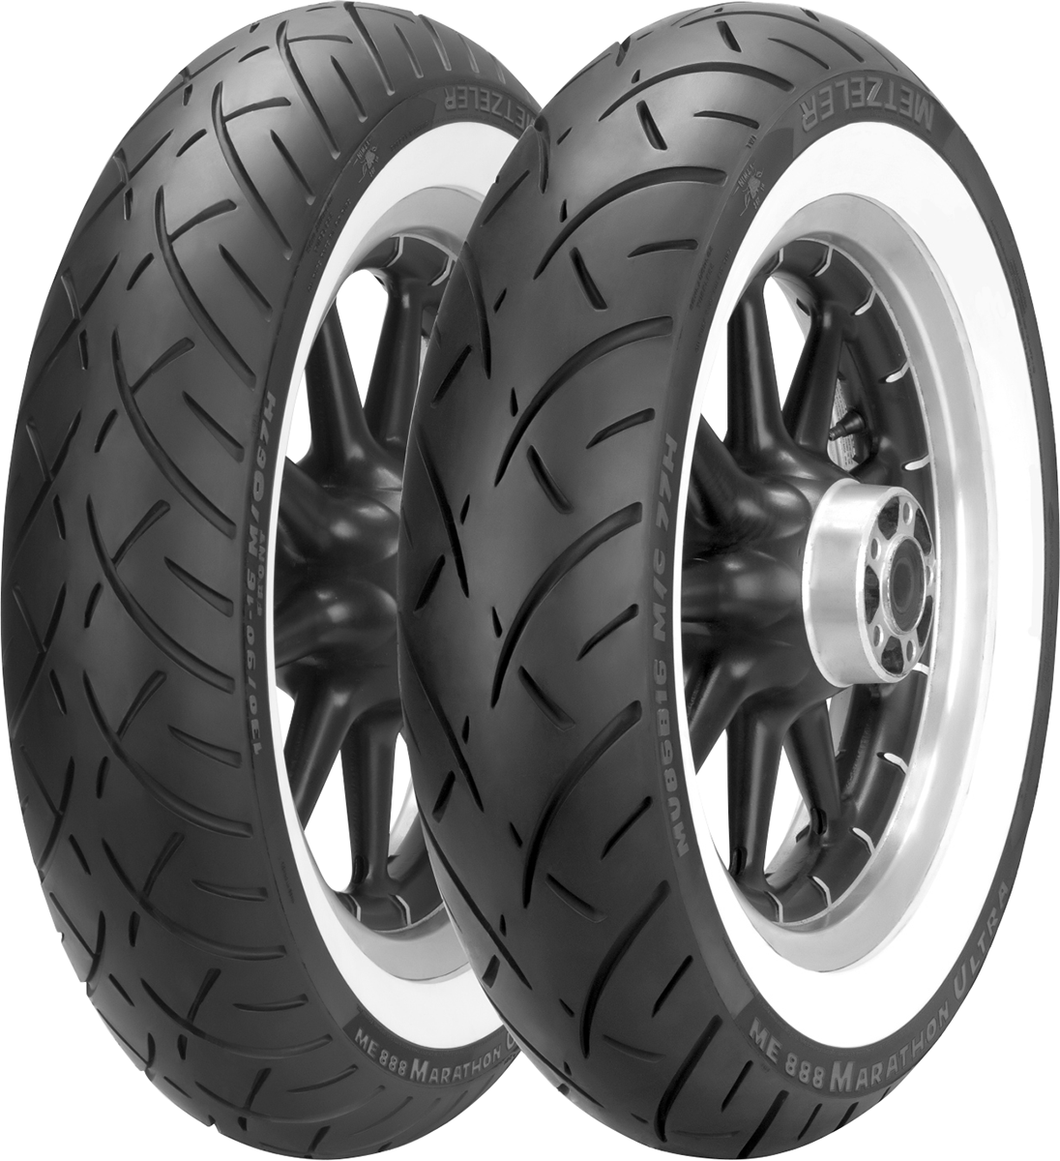 Tire - ME 888 - Wide Whitewall - MT90B16